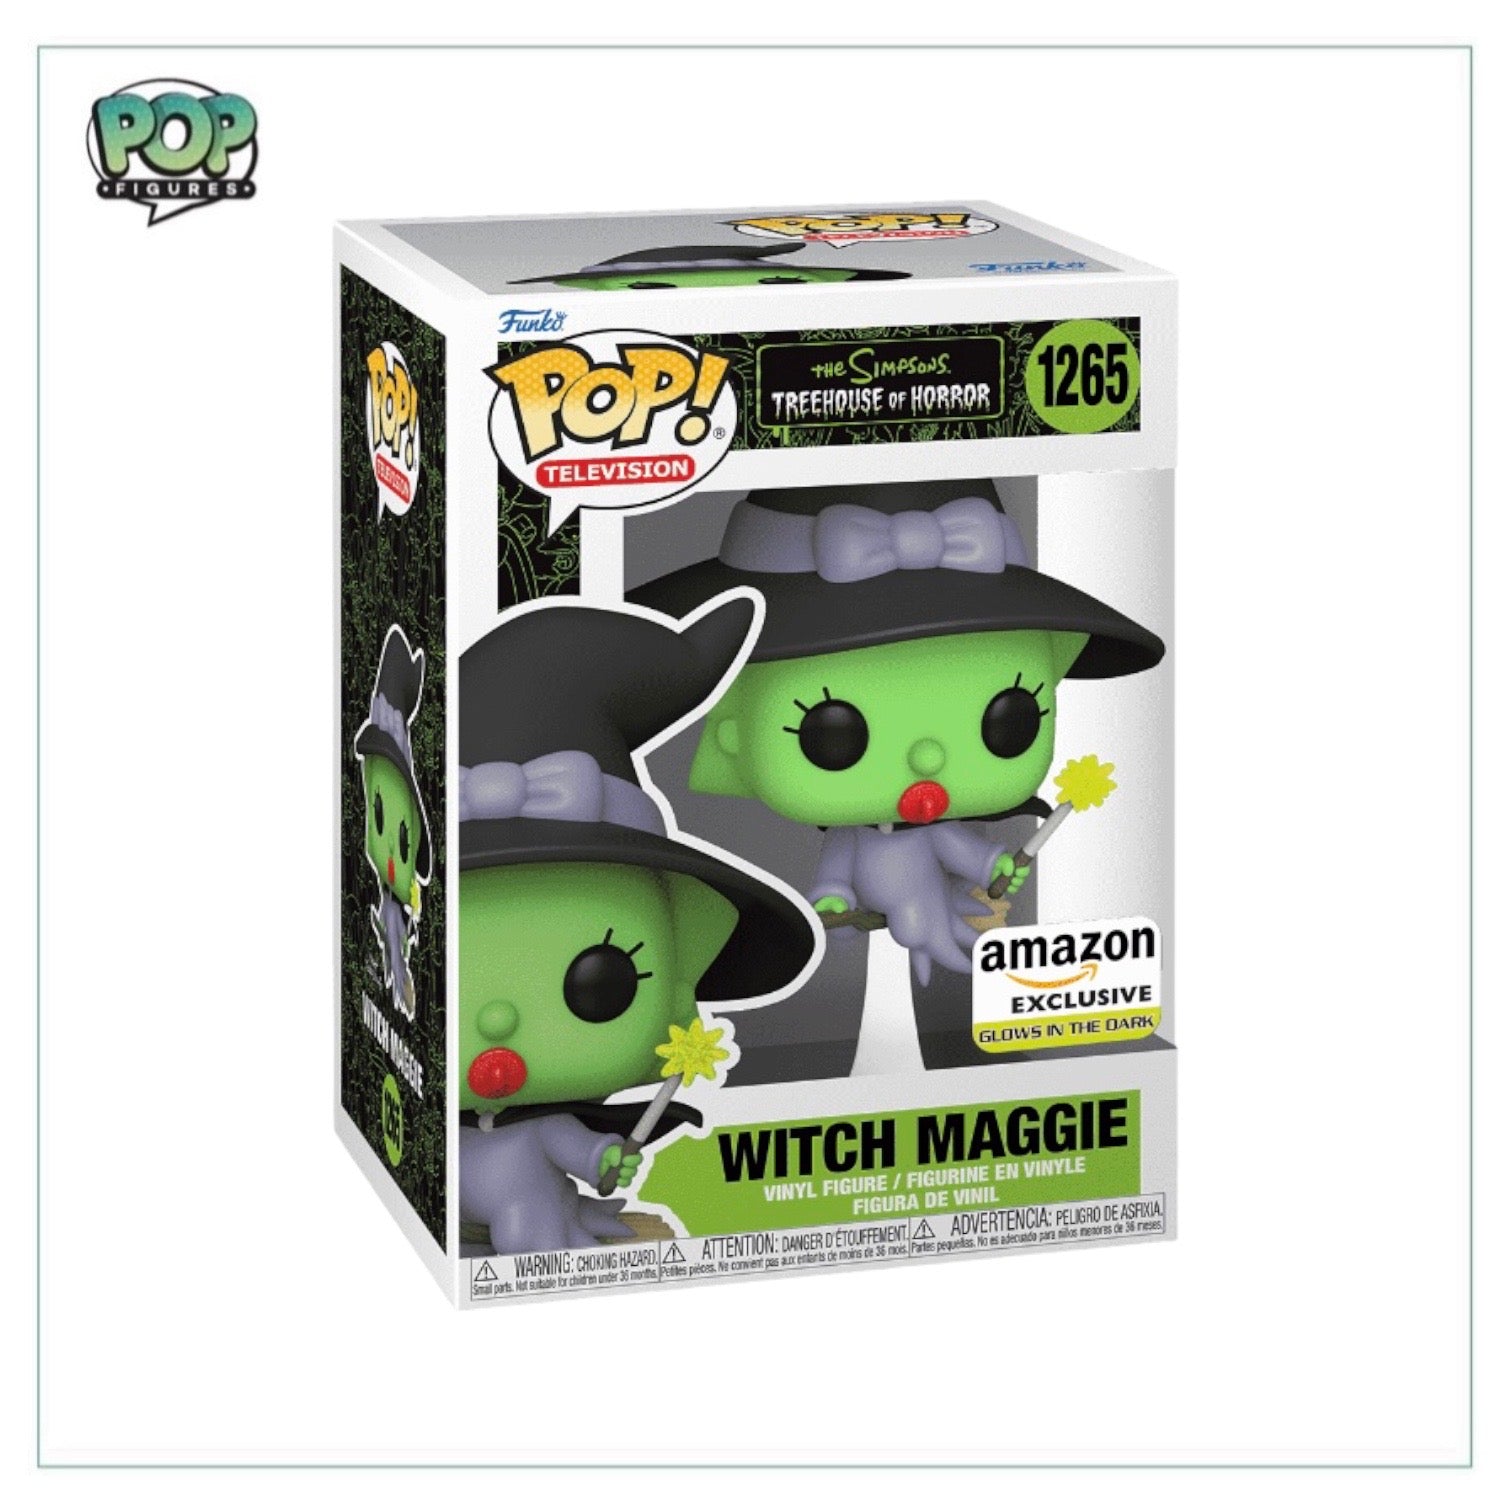 Witch Maggie #1265 (Glows in the Dark) Funko Pop! - The Simpsons Treehouse of Terror - Amazon Exclusive